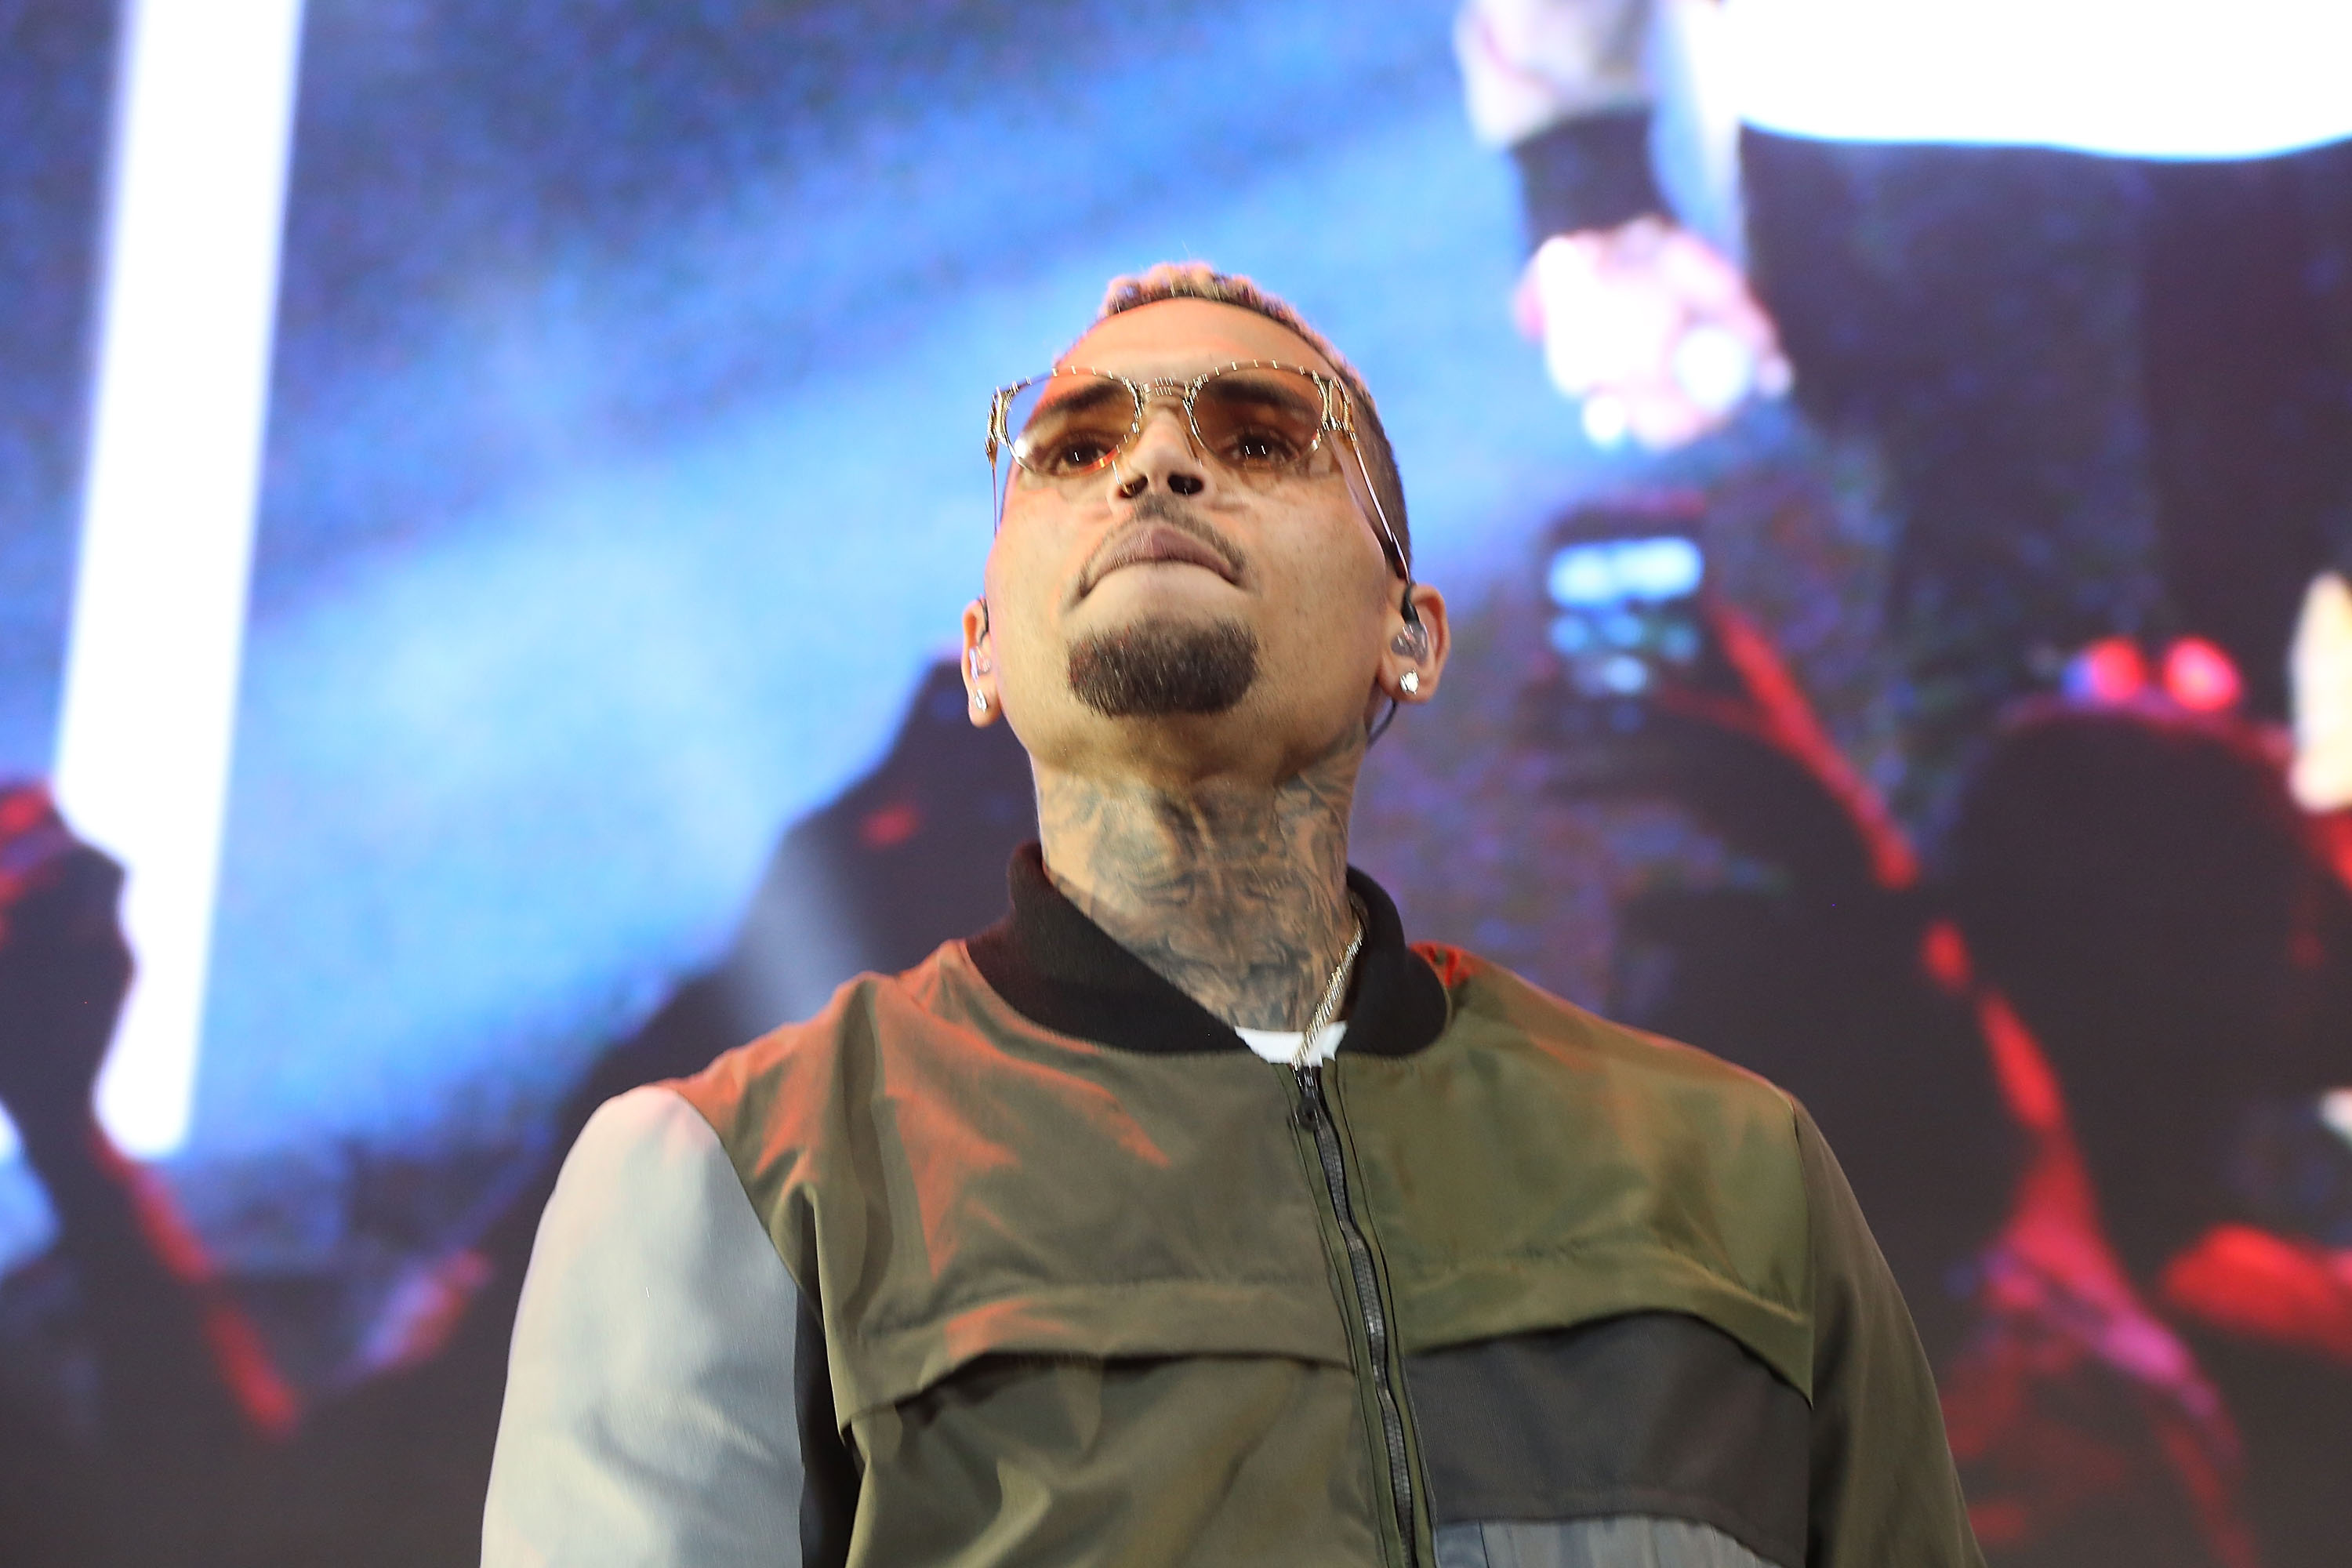 13 Lyric References That Let Us Know Chris Browns Sex Game